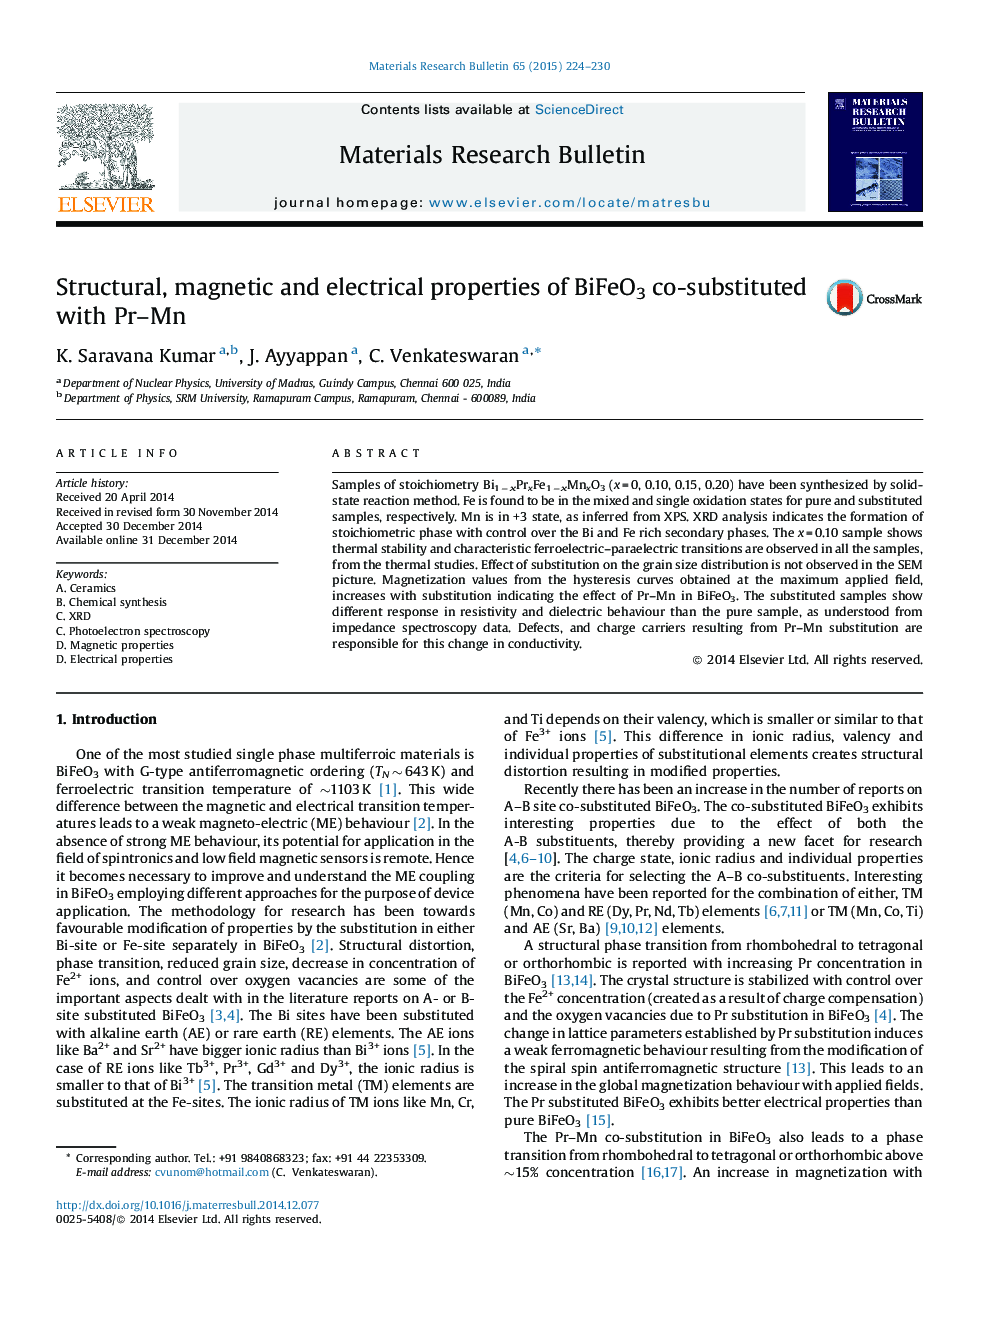 Structural, magnetic and electrical properties of BiFeO3 co-substituted with Pr–Mn